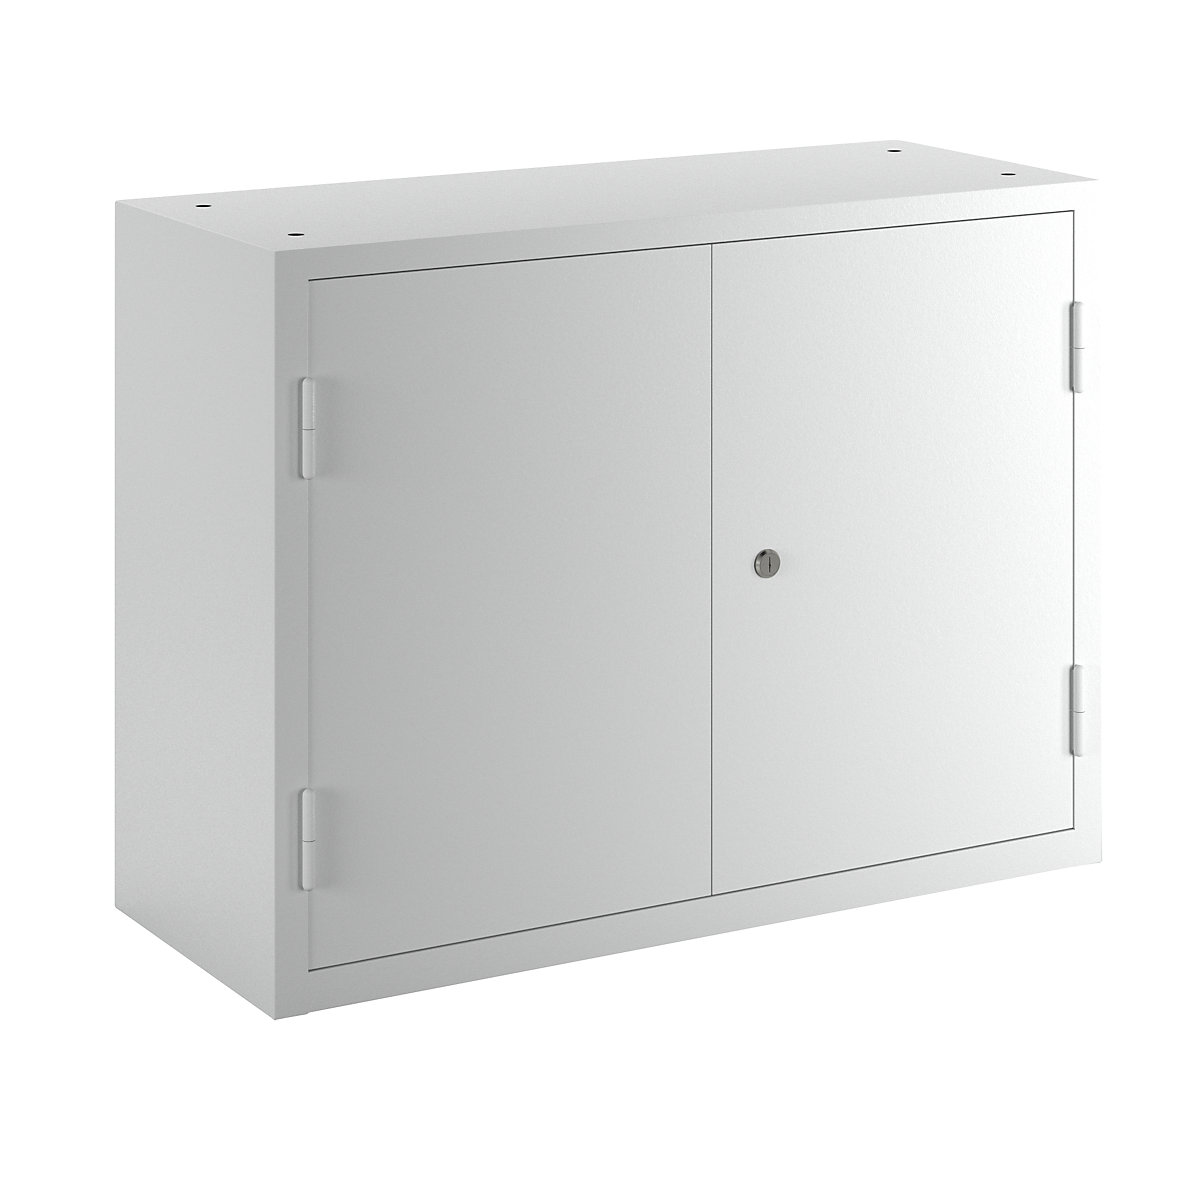 Wall mounted cupboard for the workshop – eurokraft basic, HxWxD 600 x 800 x 320 mm, solid panel doors, with 2 shelves + 2 drawers, light grey RAL 7035-7